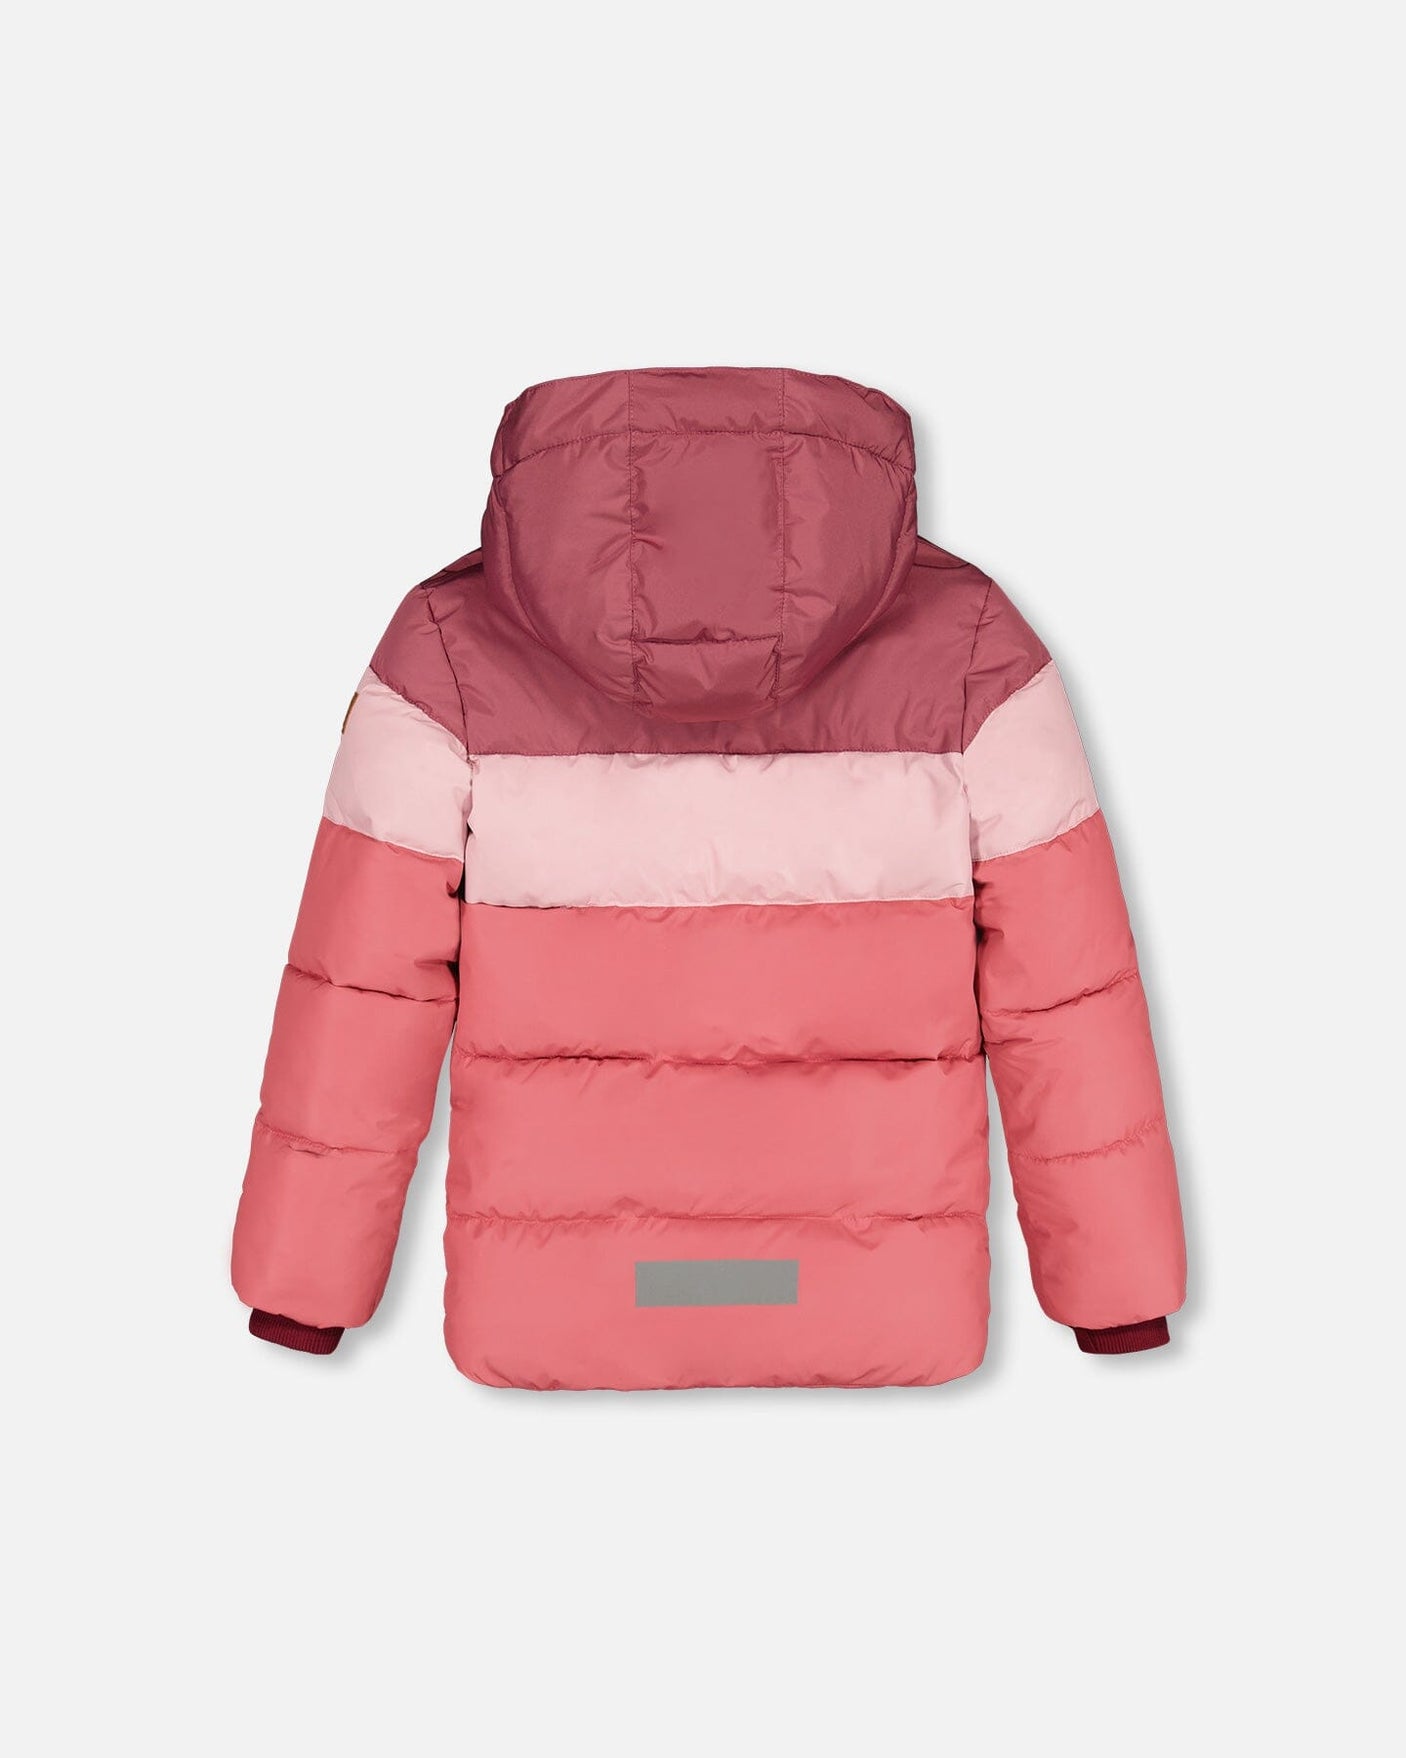 Puffy Jacket Pink And Plum Color Block-2